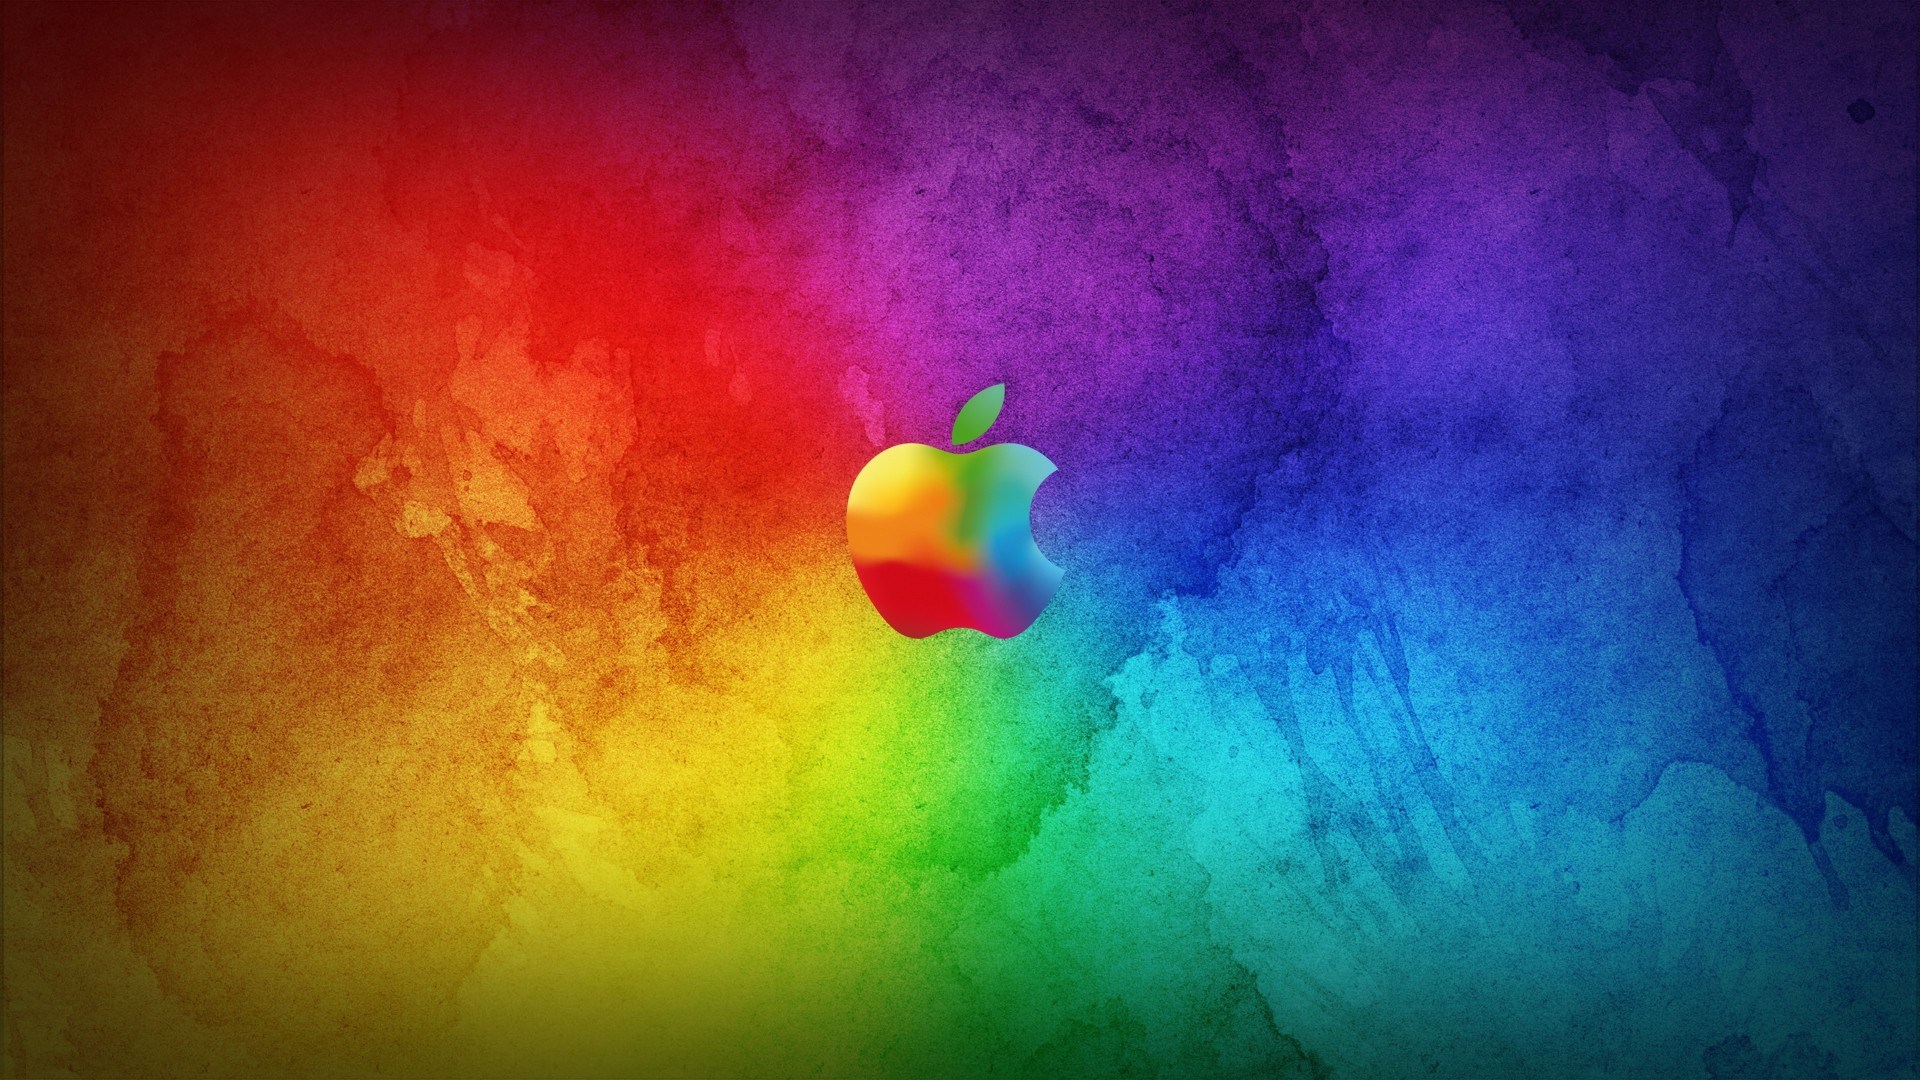 Apple Colorful Background Wallpaper [1920x1080]